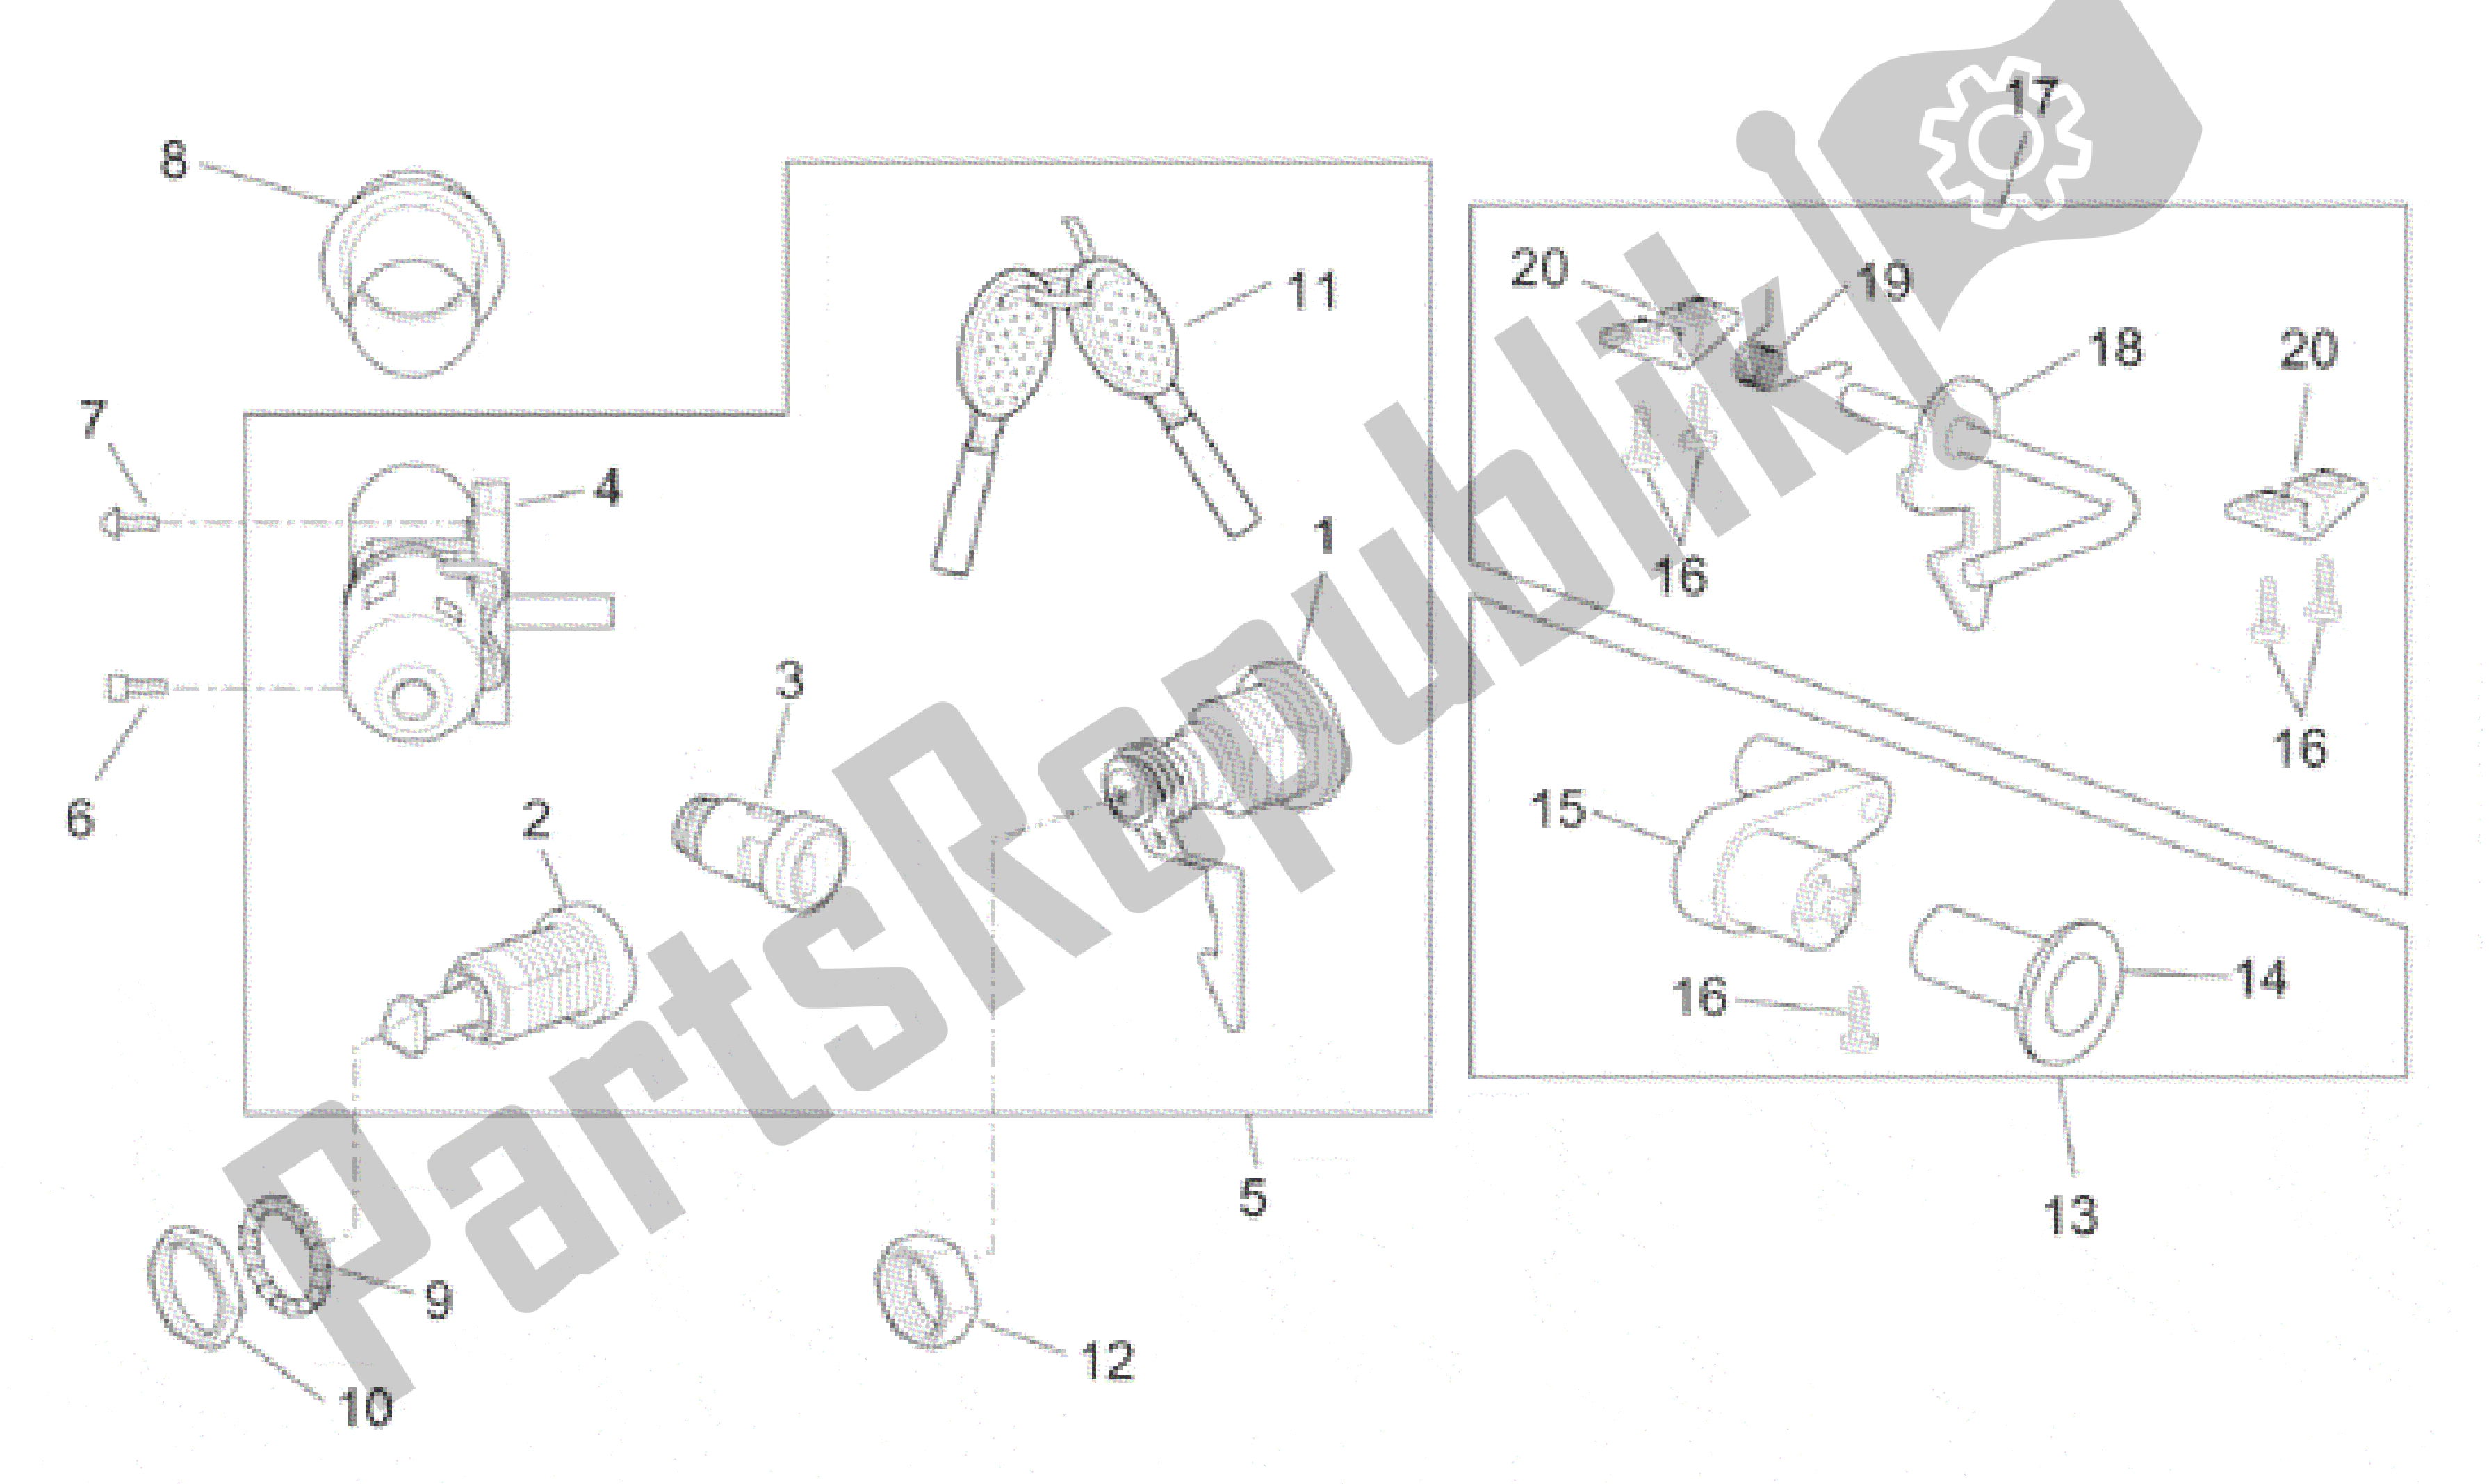 All parts for the Lock Hardware Kit of the Aprilia Scarabeo 100 2001 - 2005